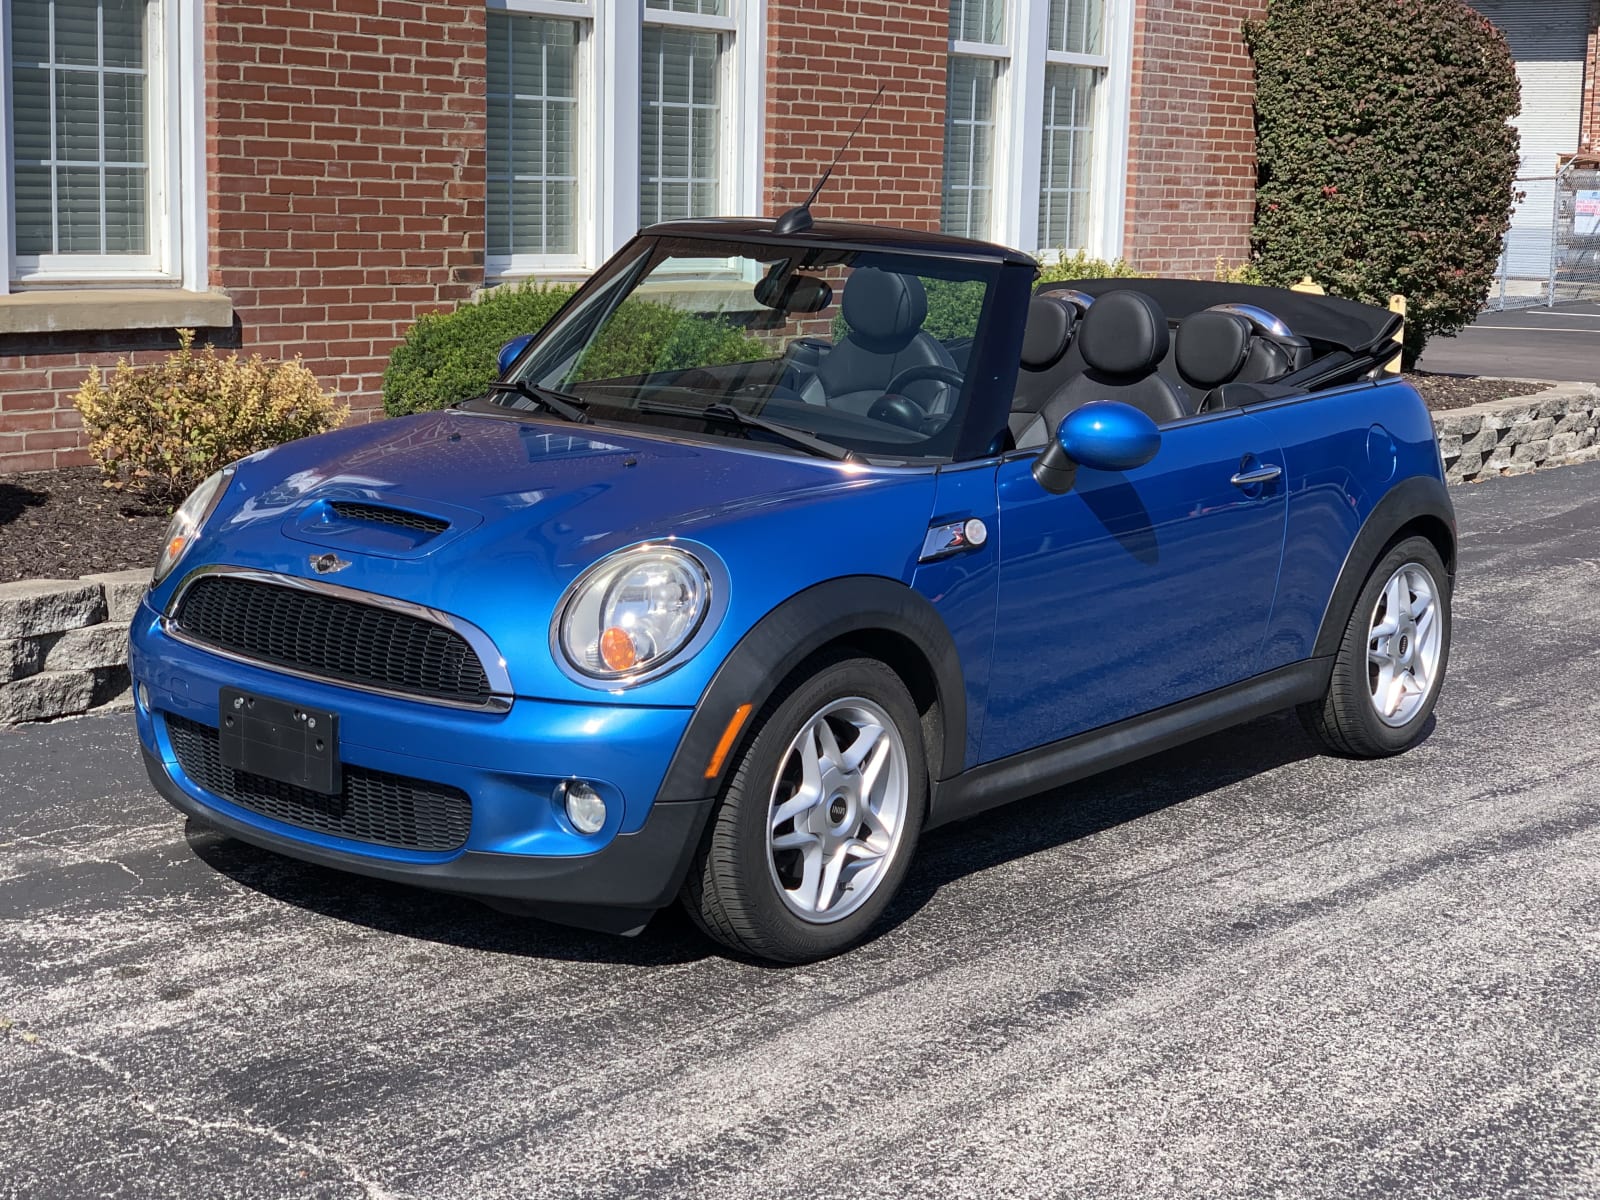 2010 Mini Cooper S Convertible at Indy Fall Special 2020 as F11 - Mecum ...